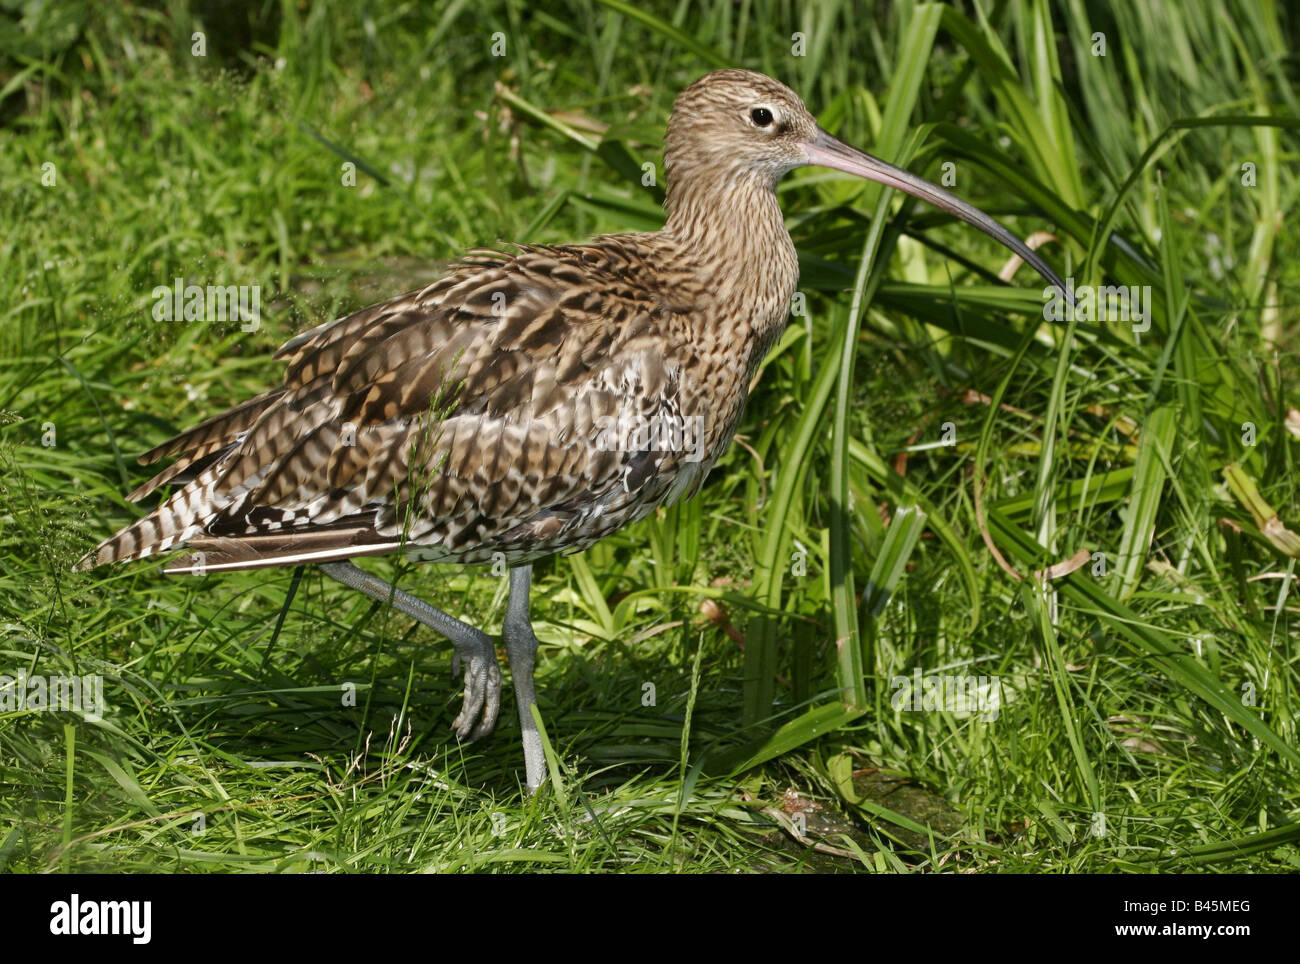 zoology / animals, avian / bird, Scolopacidae, Eurasian Curlew (Numenius arquata), standing in meadow, Bavarian Forest, Germany, distribution: Europe, Additional-Rights-Clearance-Info-Not-Available Stock Photo